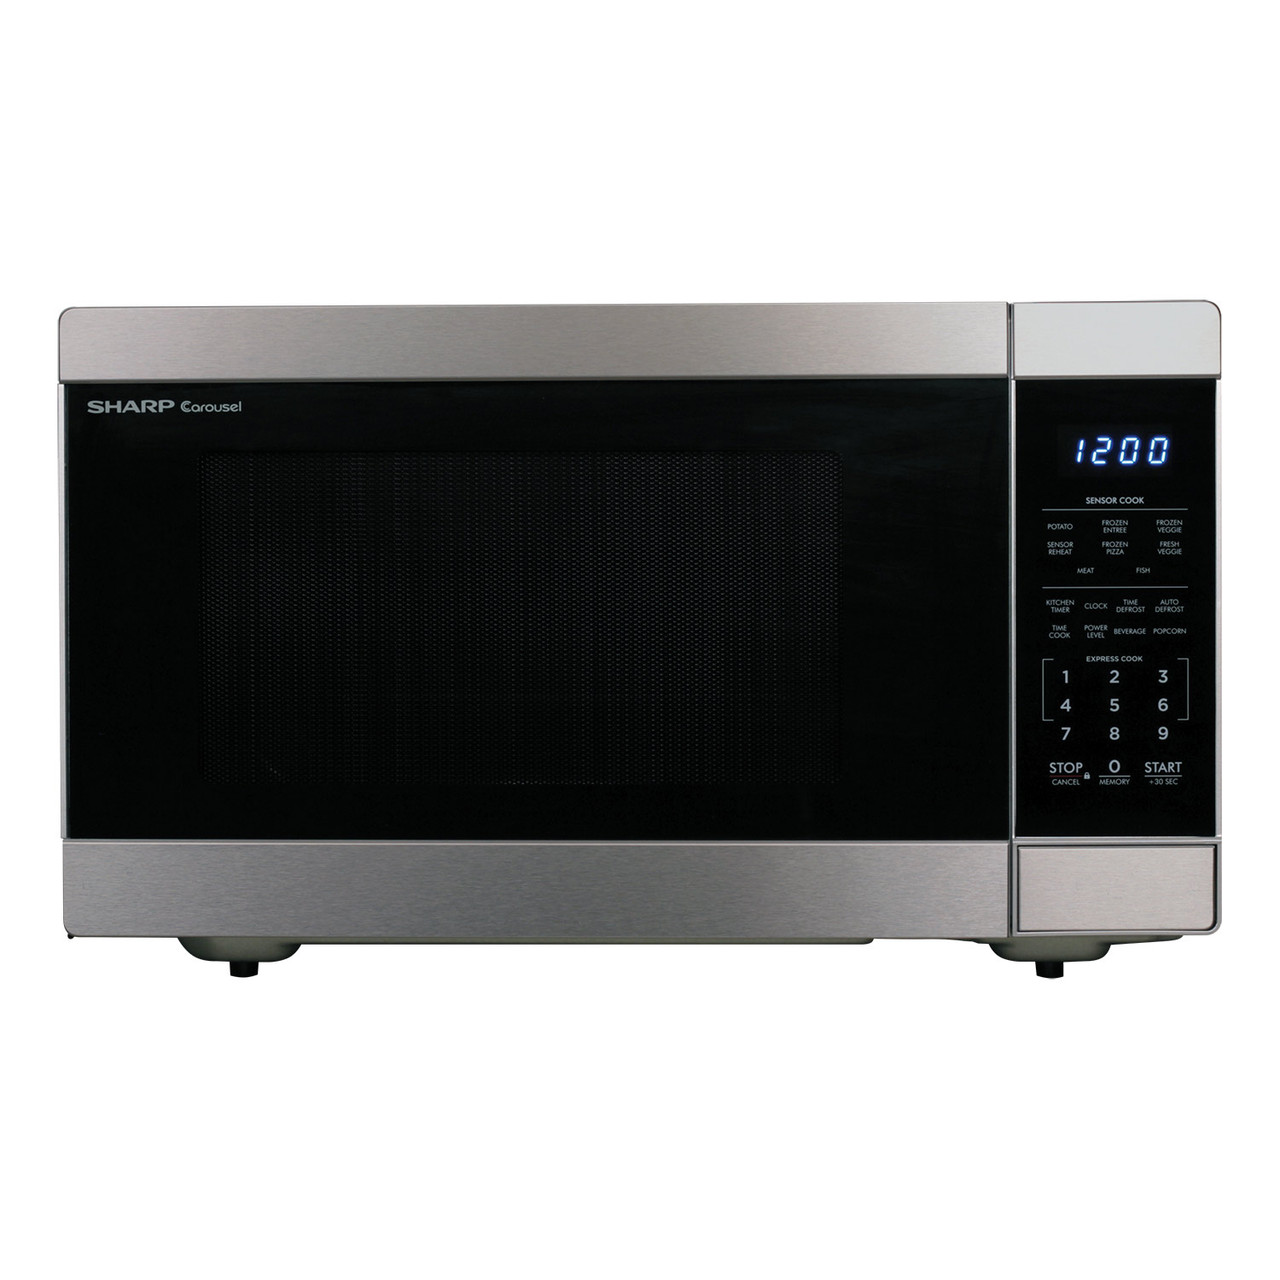 1.6 cu. ft. Stainless Steel Countertop Microwave (SMC1662DS)